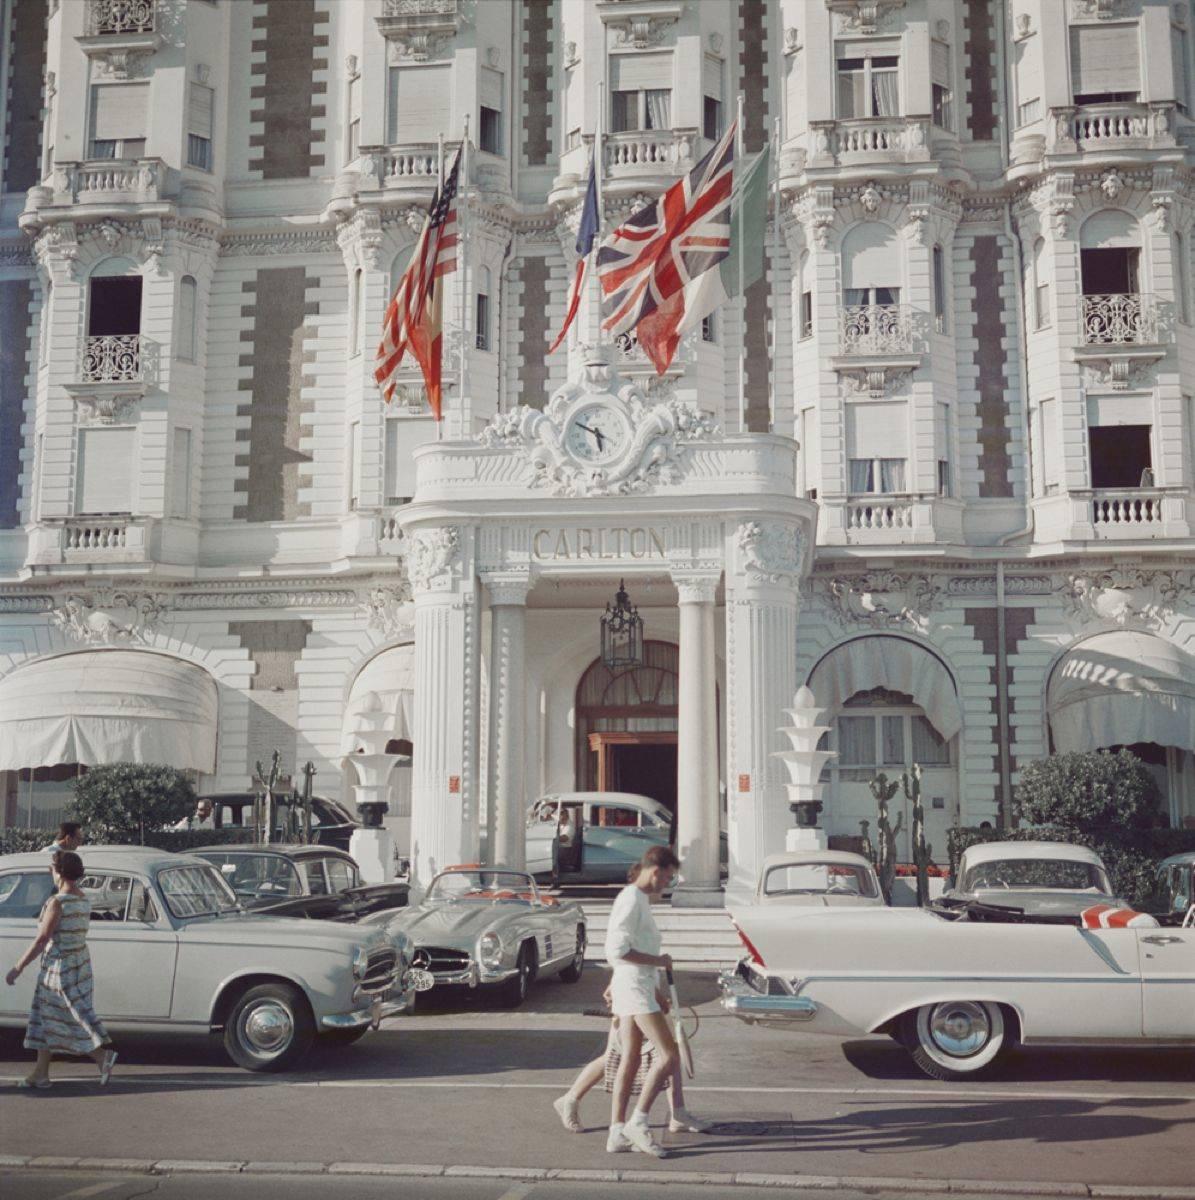 Slim Aarons Figurative Photograph - 'Carlton Hotel' Cannes (Estate Stamped Edition)